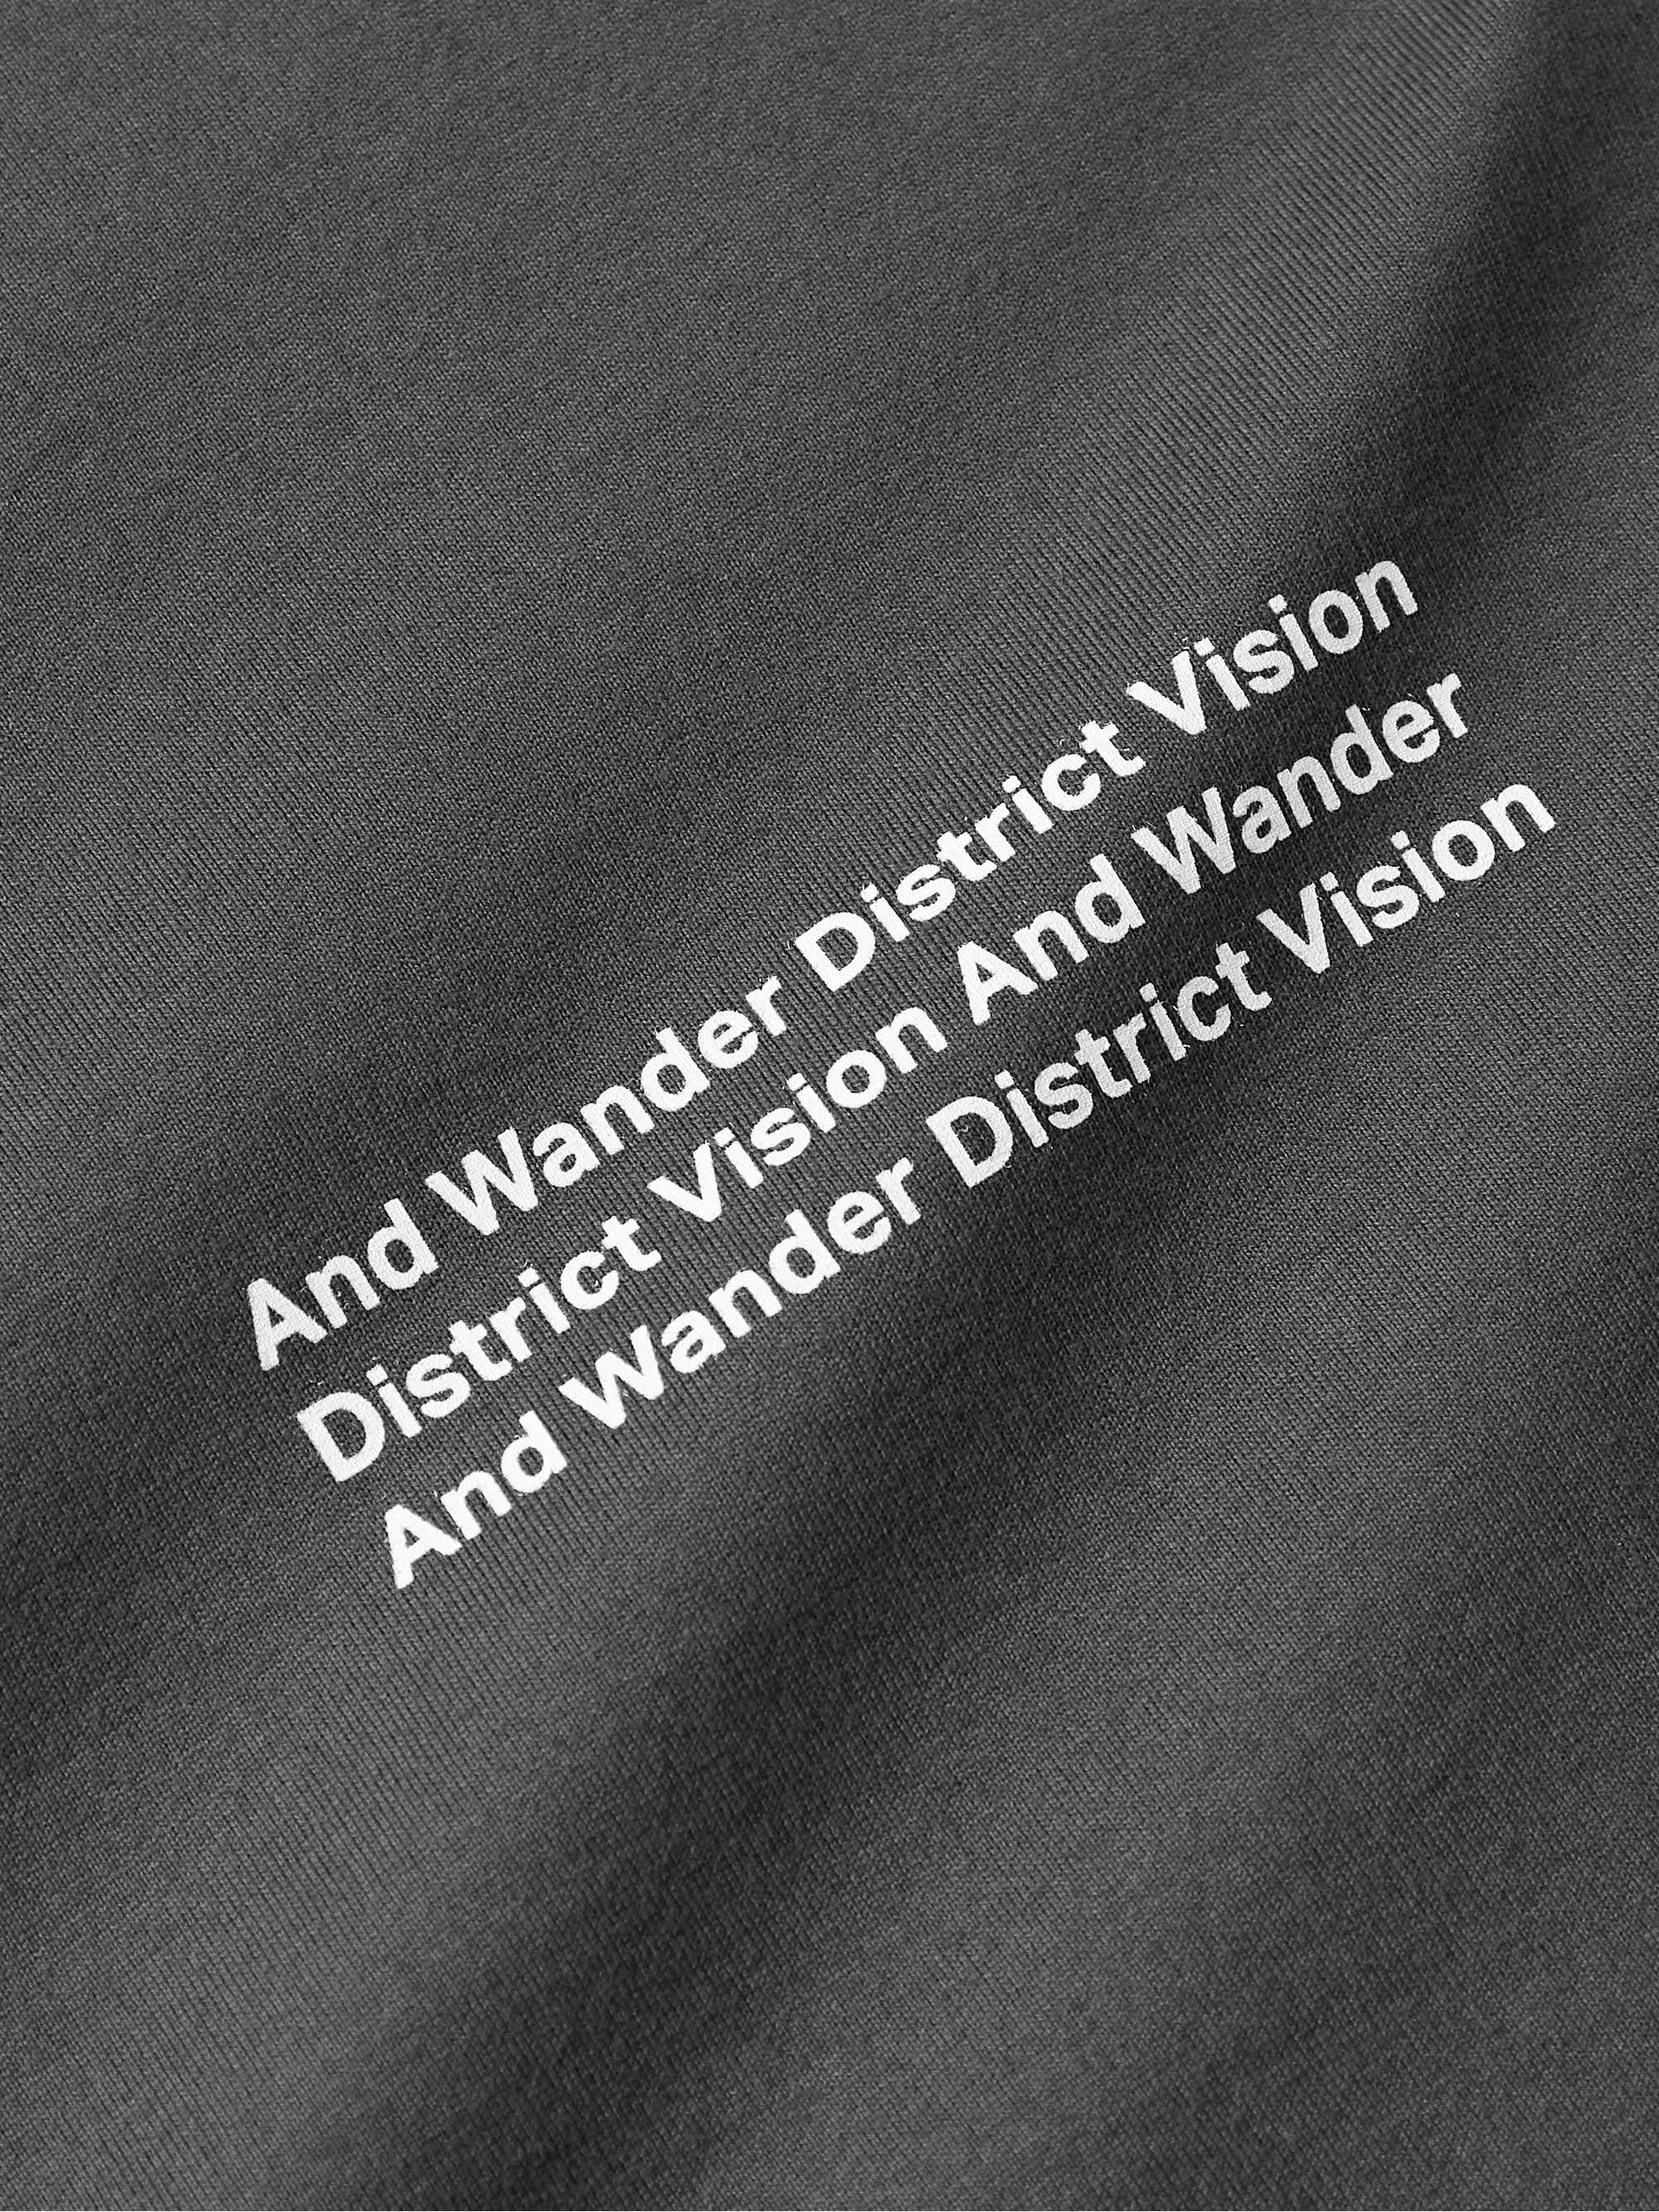 DISTRICT VISION + And Wander Logo-Print Cotton-Jersey T-Shirt